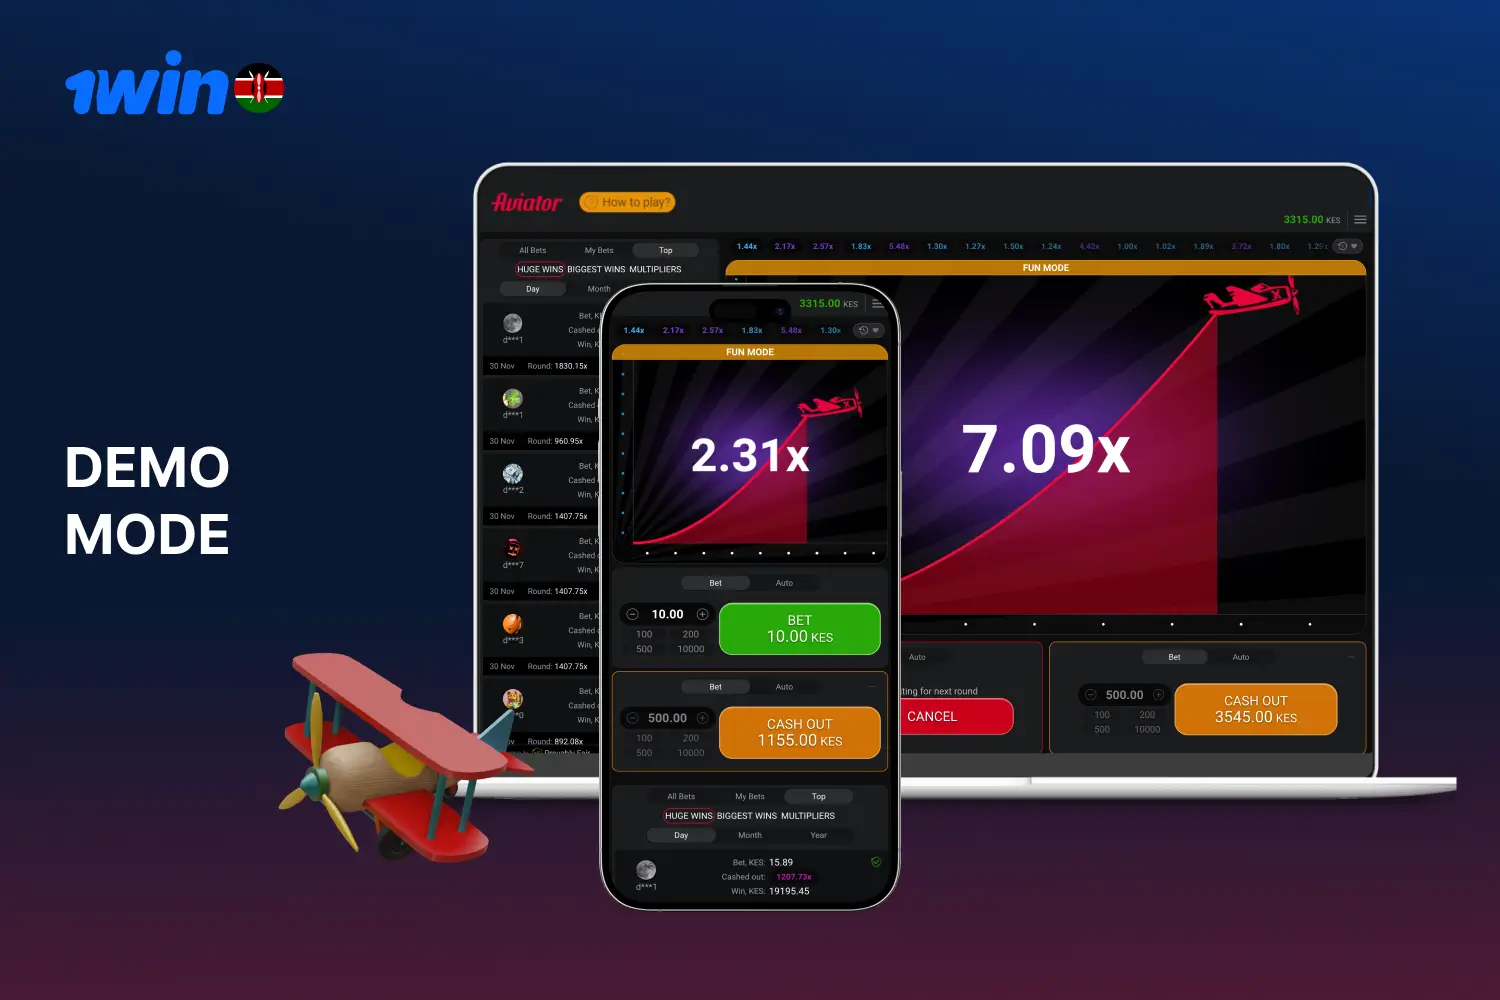 All interested users of the 1win casino from Kenya can play Aviator without replenishing a deposit in demo mode